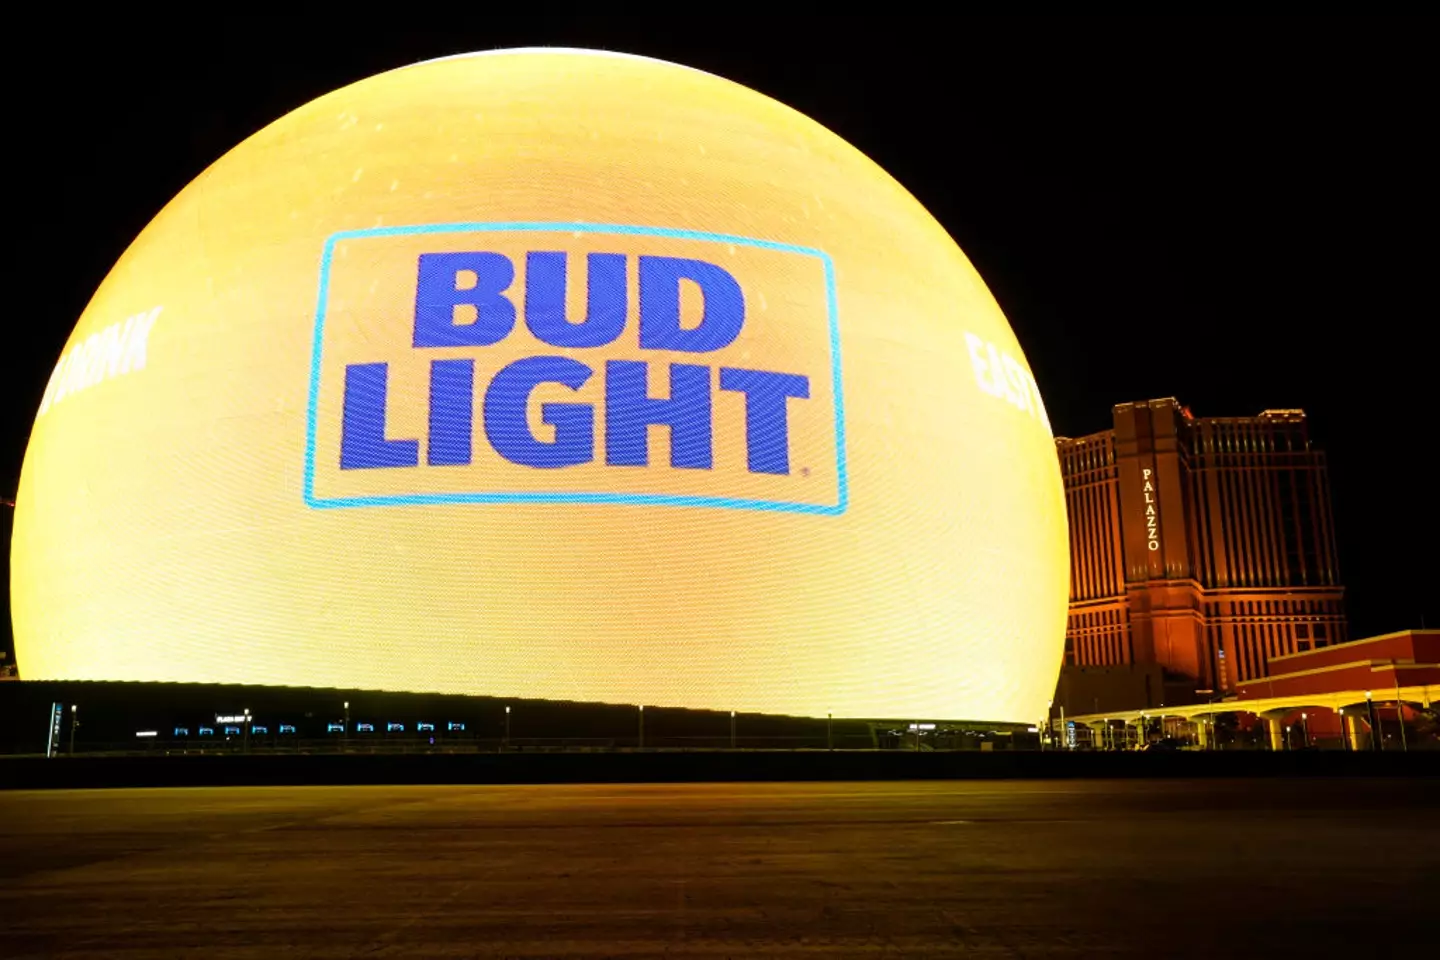 An add for Bud Light is displayed on the Sphere arena ahead of Super Bowl LVIII in Las Vegas.